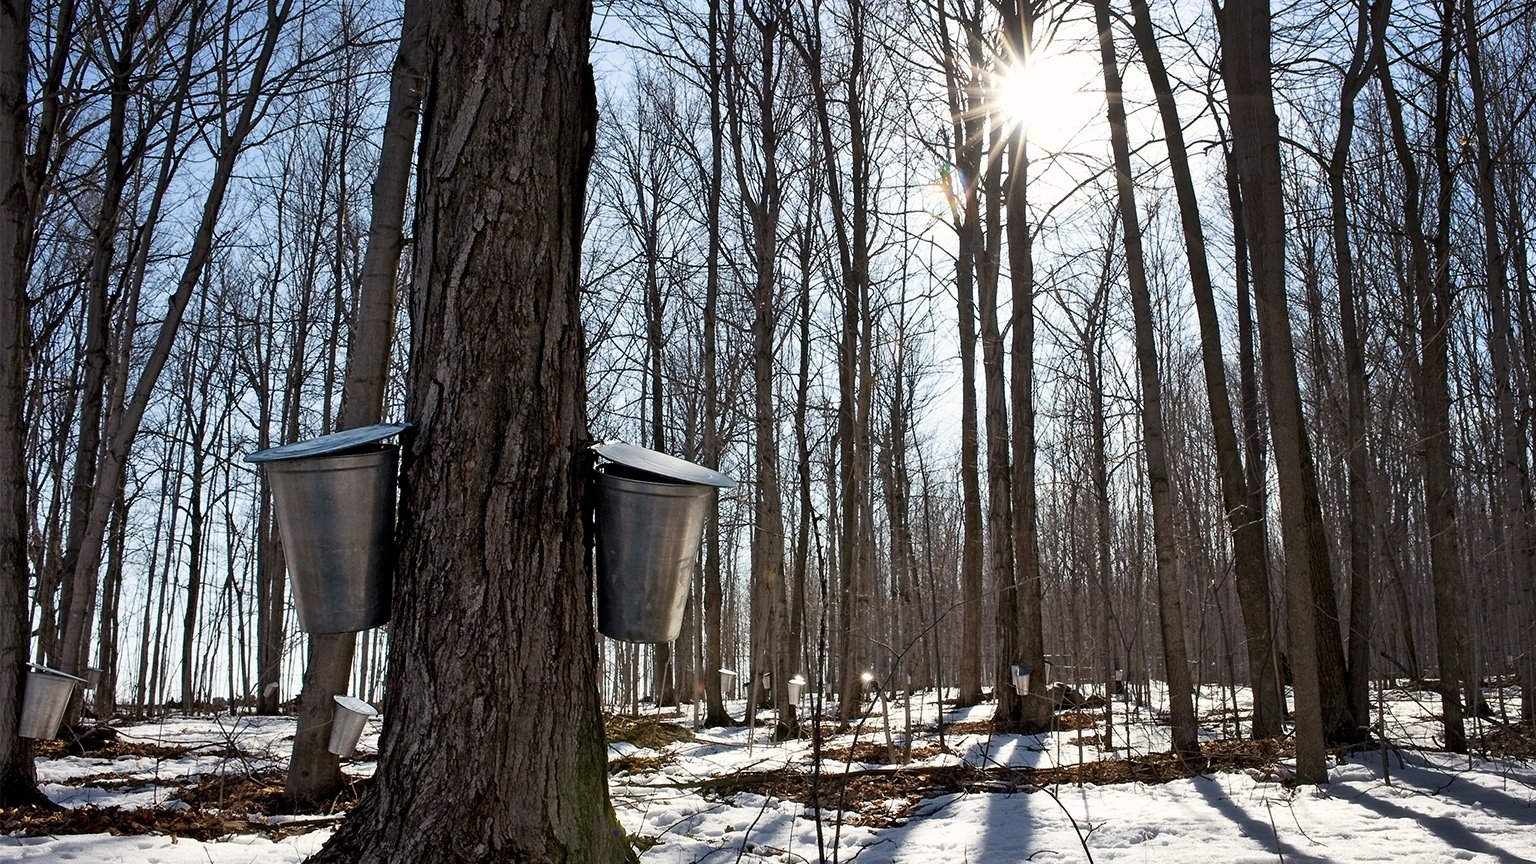 Maple syrup harvesting